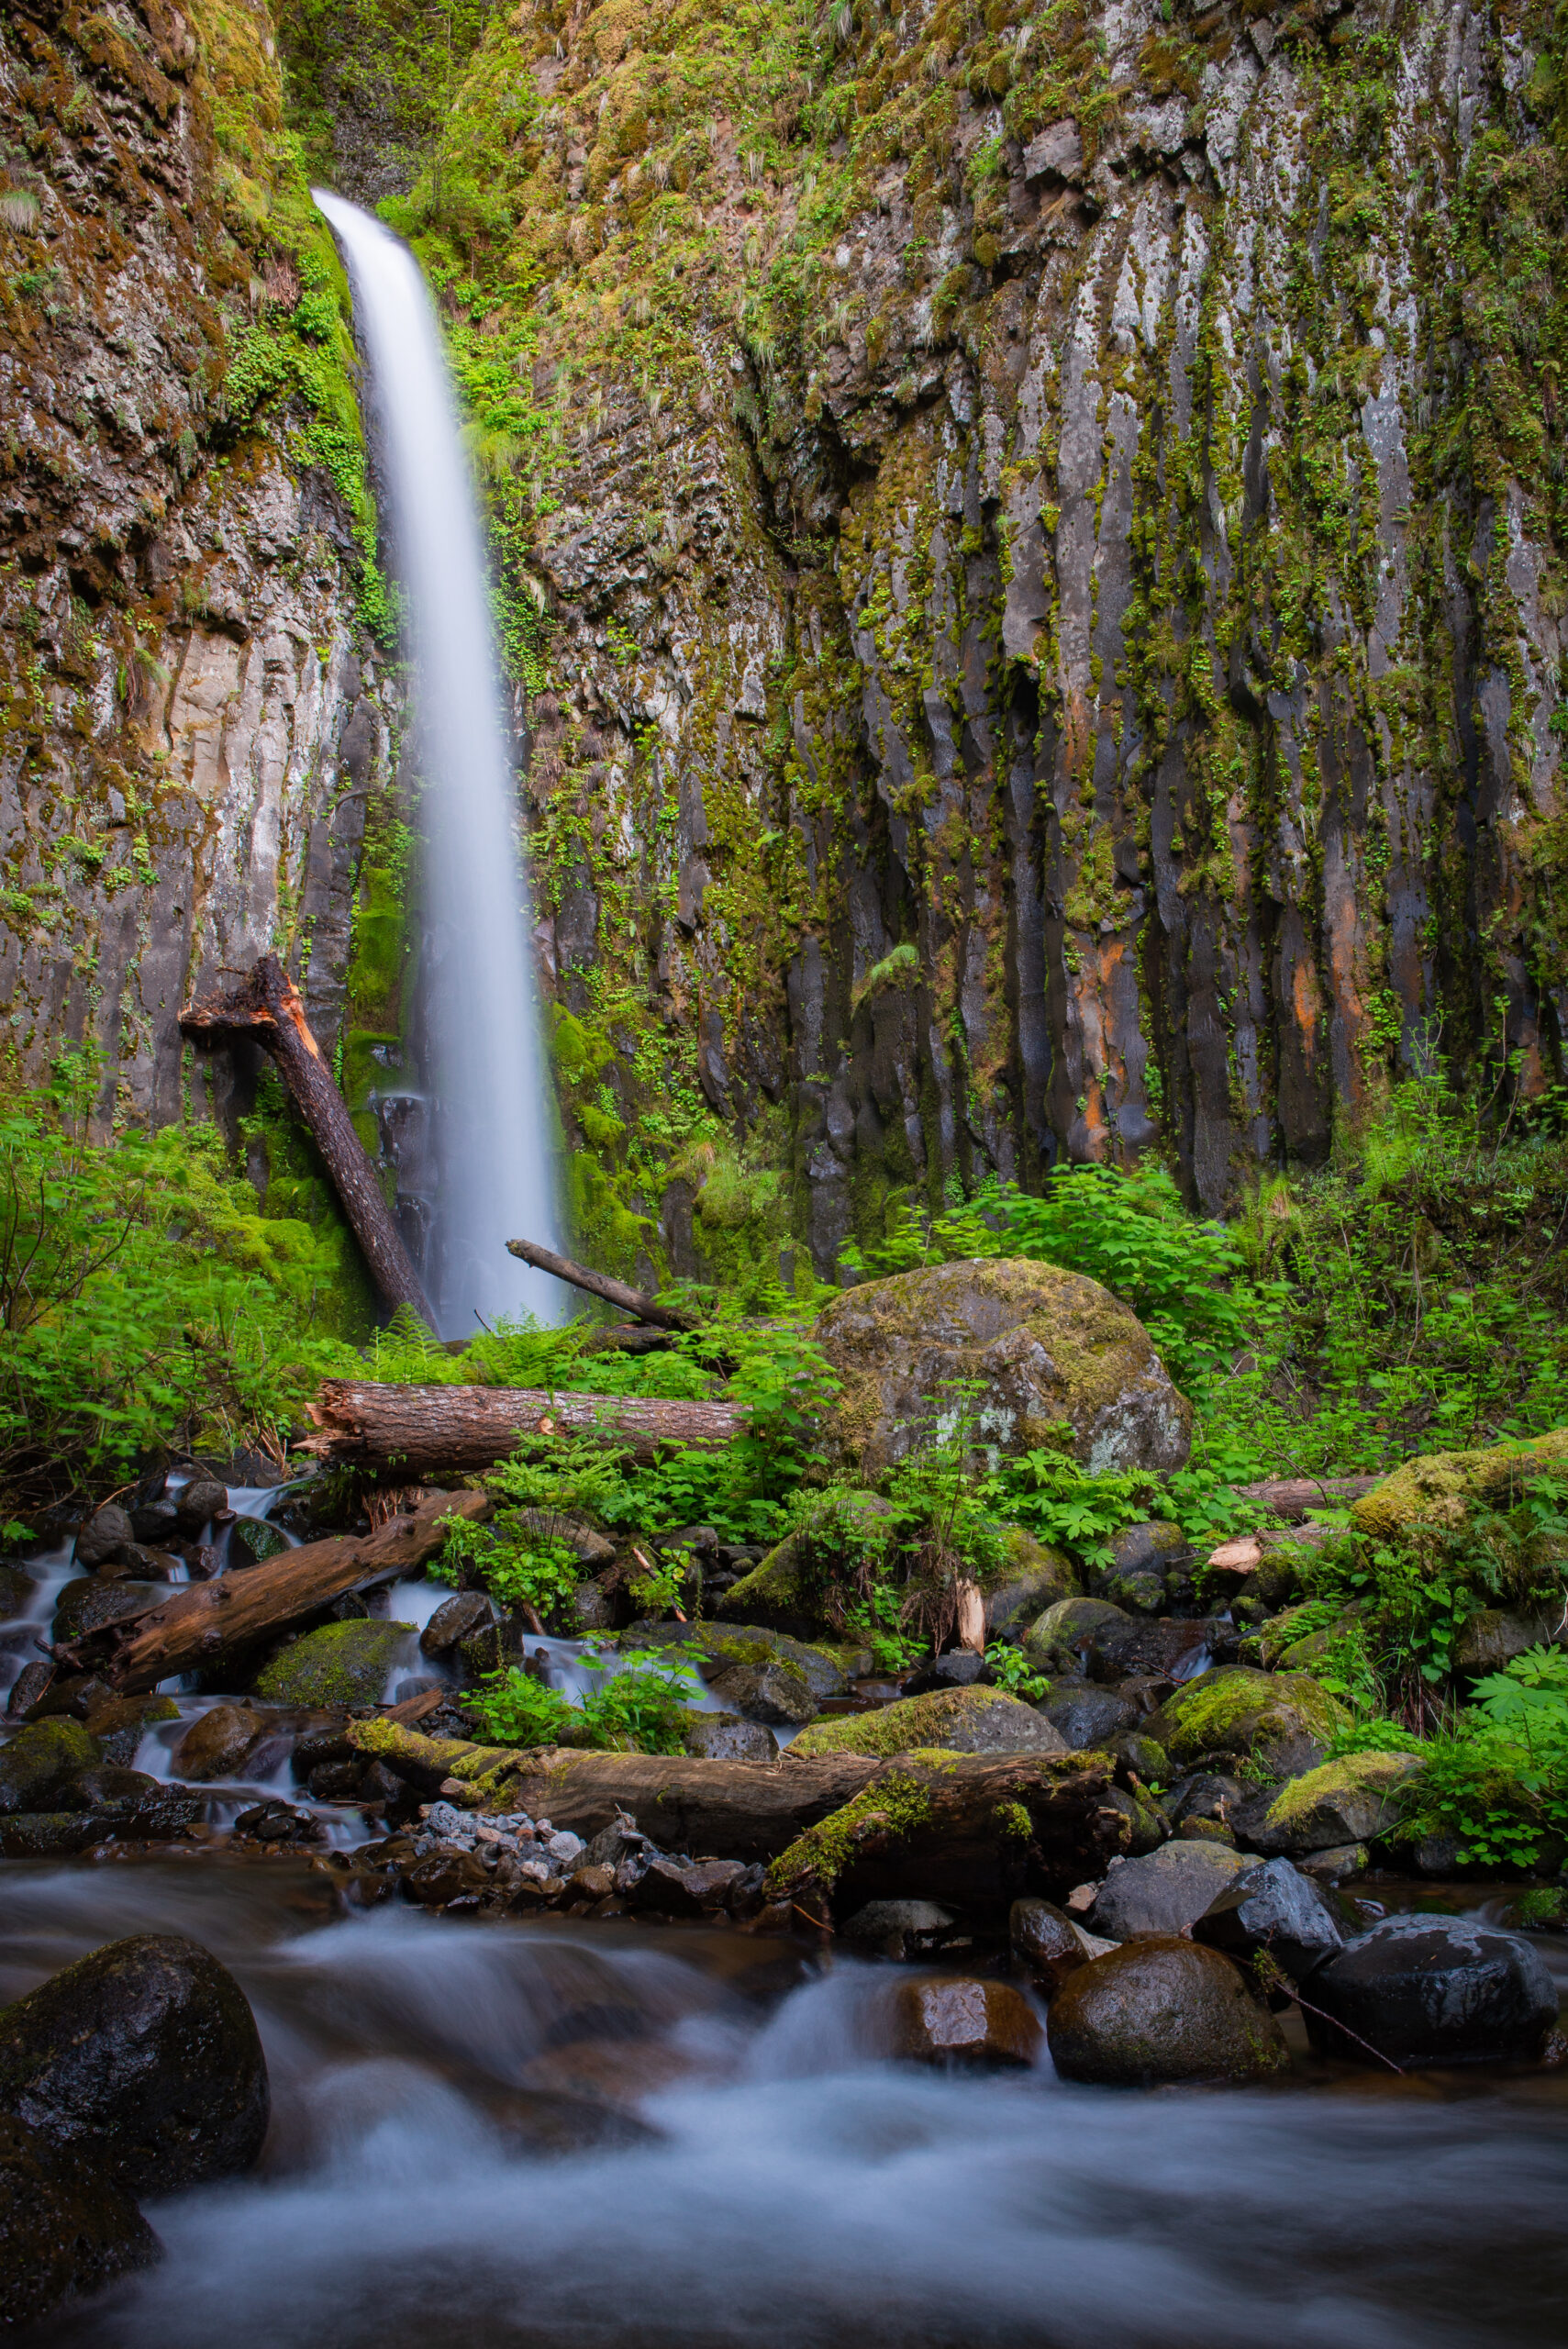 A tall, thin waterfall pouring from moss covered walls into a stream.